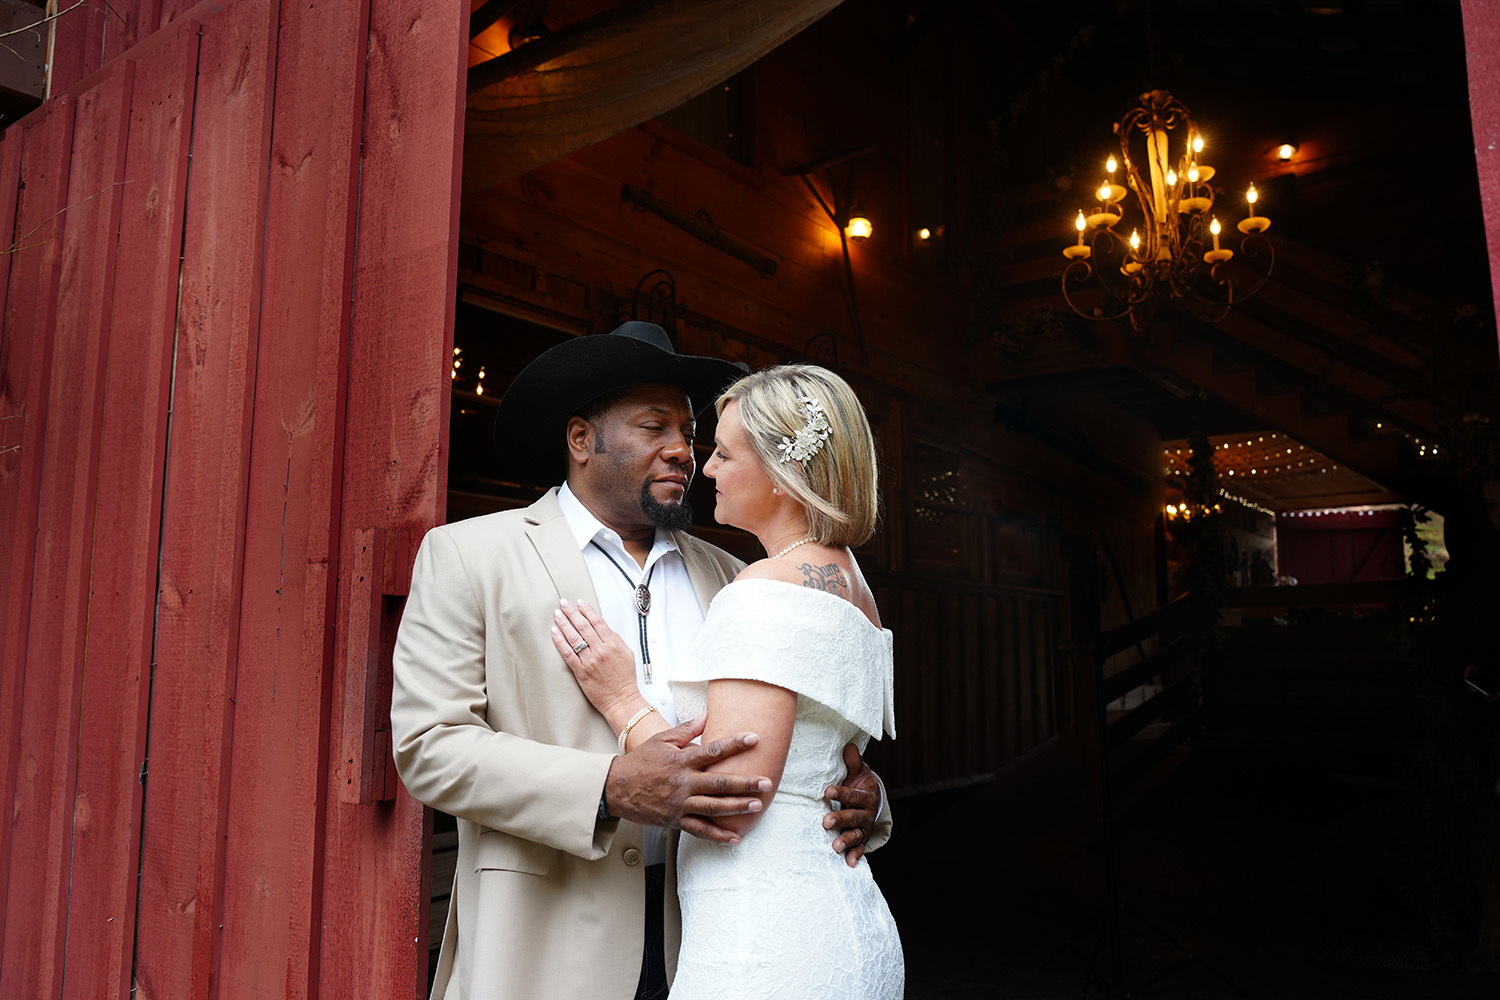 Sexy portrait of a wedding couple at a red barn door with a chandelier behind them